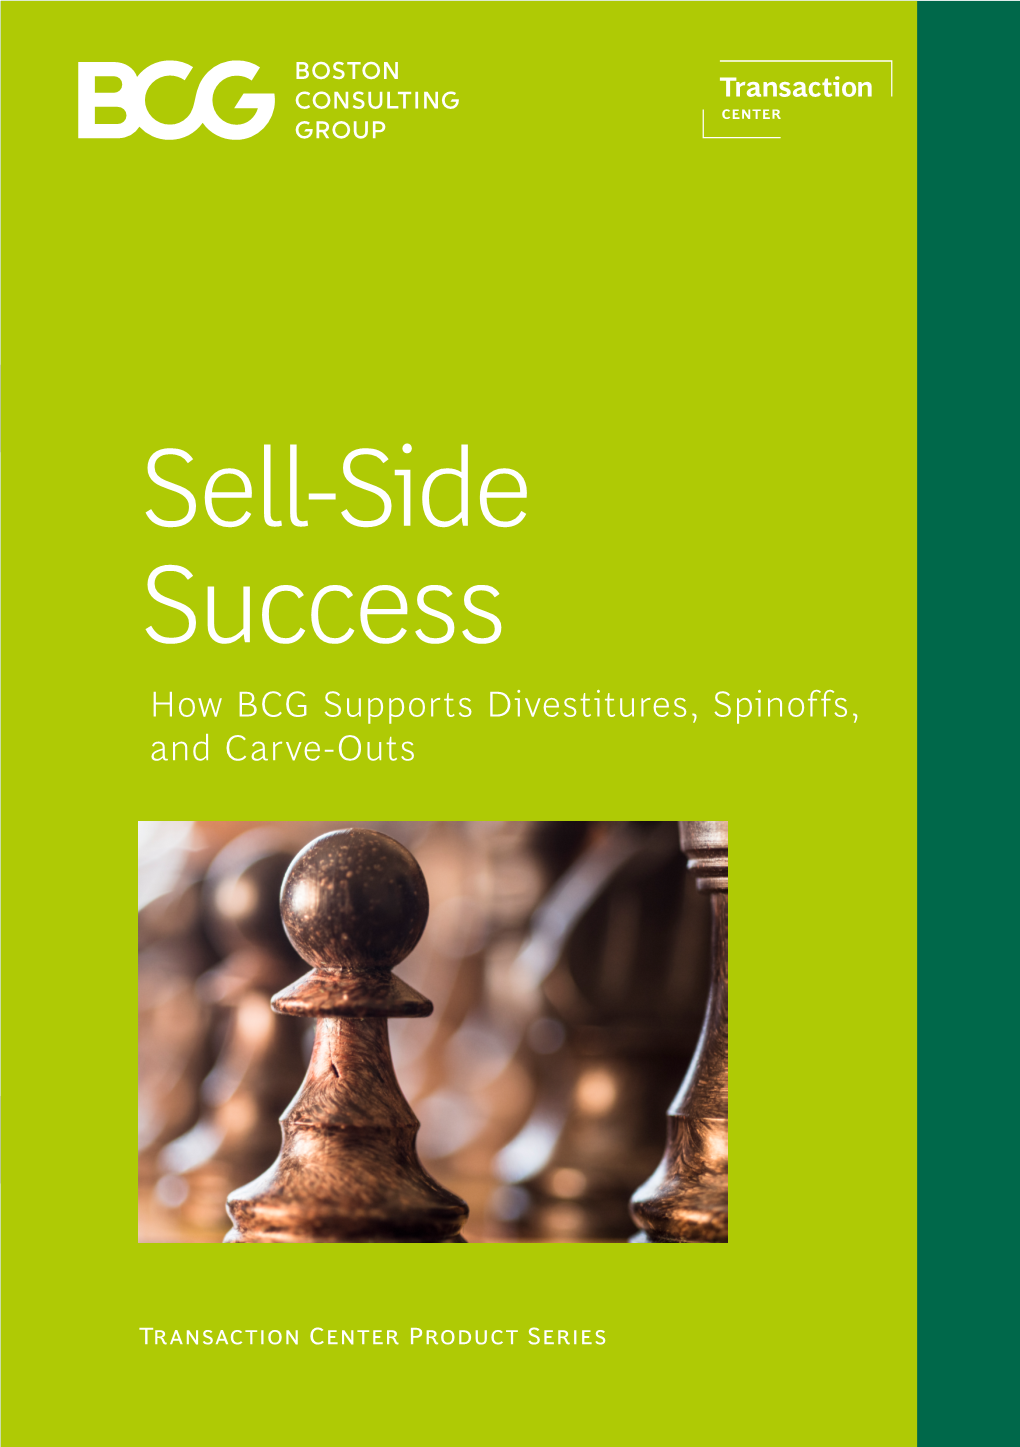 Sell-Side Success How BCG Supports Divestitures, Spinoffs, and Carve-Outs